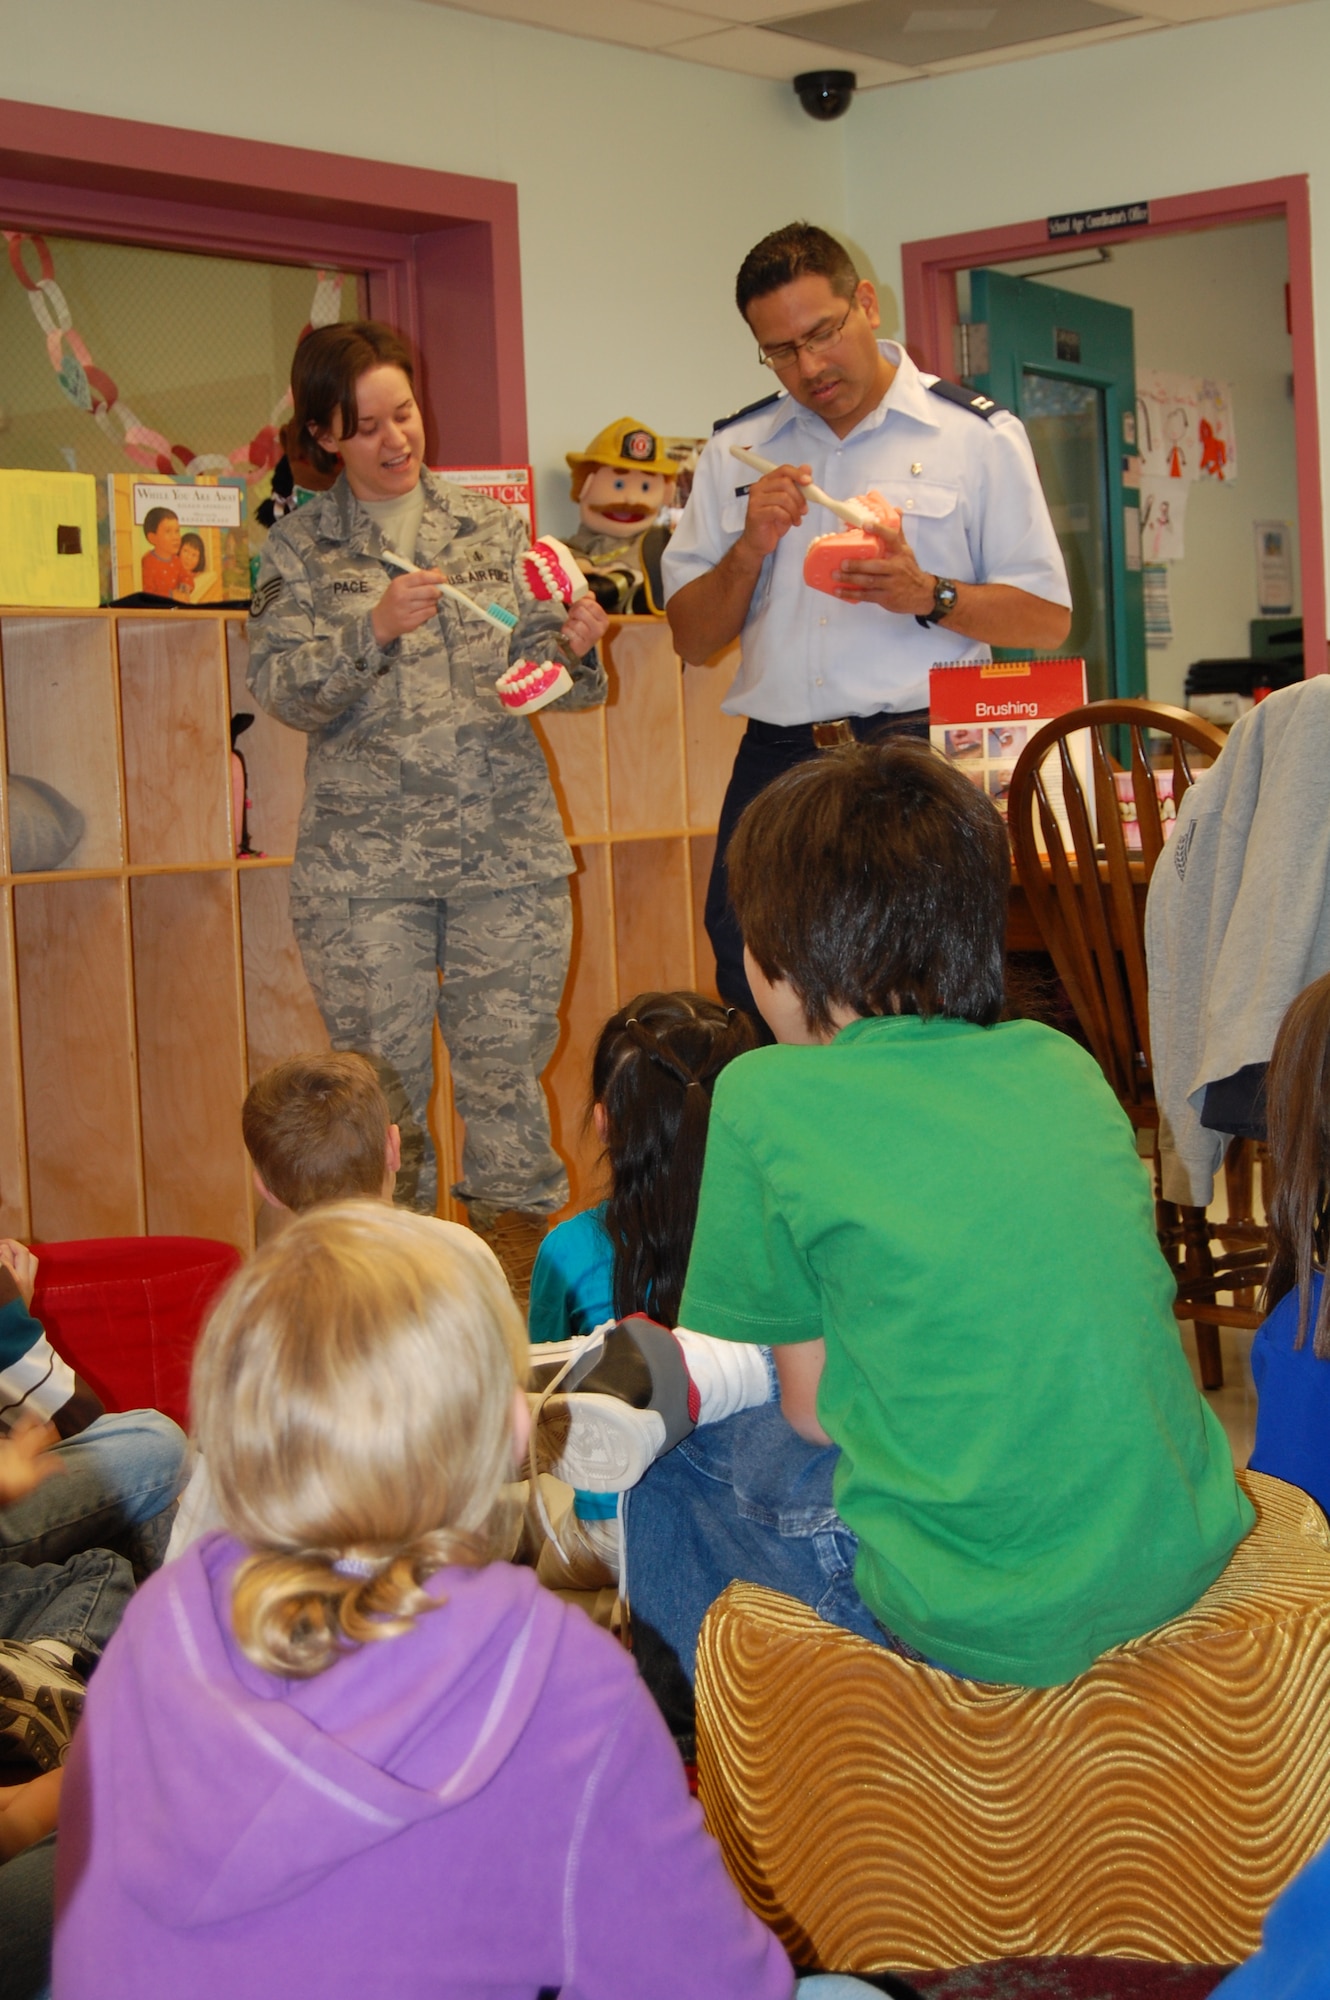 LAUGHLIN AIR FORCE BASE, Texas – Captain Edward Gonzalez and Staff Sgt. Lynnette Pace, both of the 47th Medical Operations Squadron, demonstrate the proper technique for brushing teeth to children at Laughlin’s Youth Center Feb. 7. The demonstration was to raise awareness for Feb. being National Children’s Dental Health Month. (U.S. Air Force photo by 2nd Lt. Ashley Wolfe)